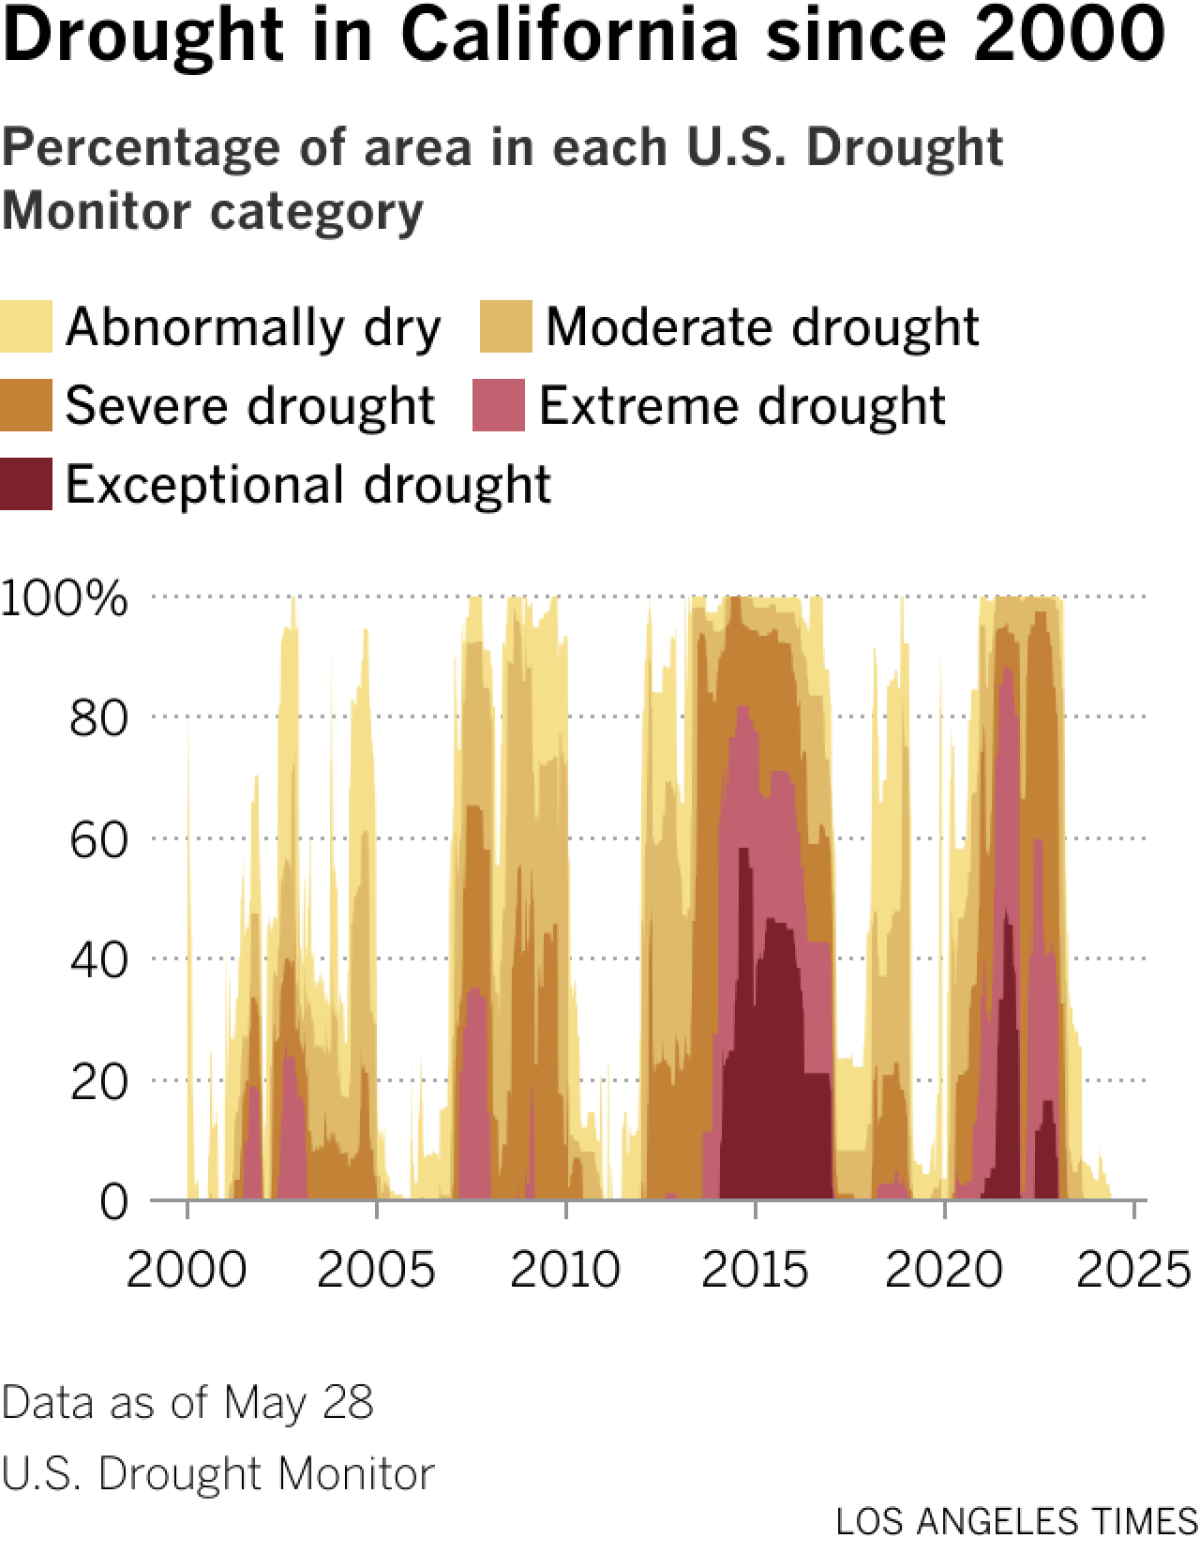 A layer chart shows the progression of drought conditions in California since 2000